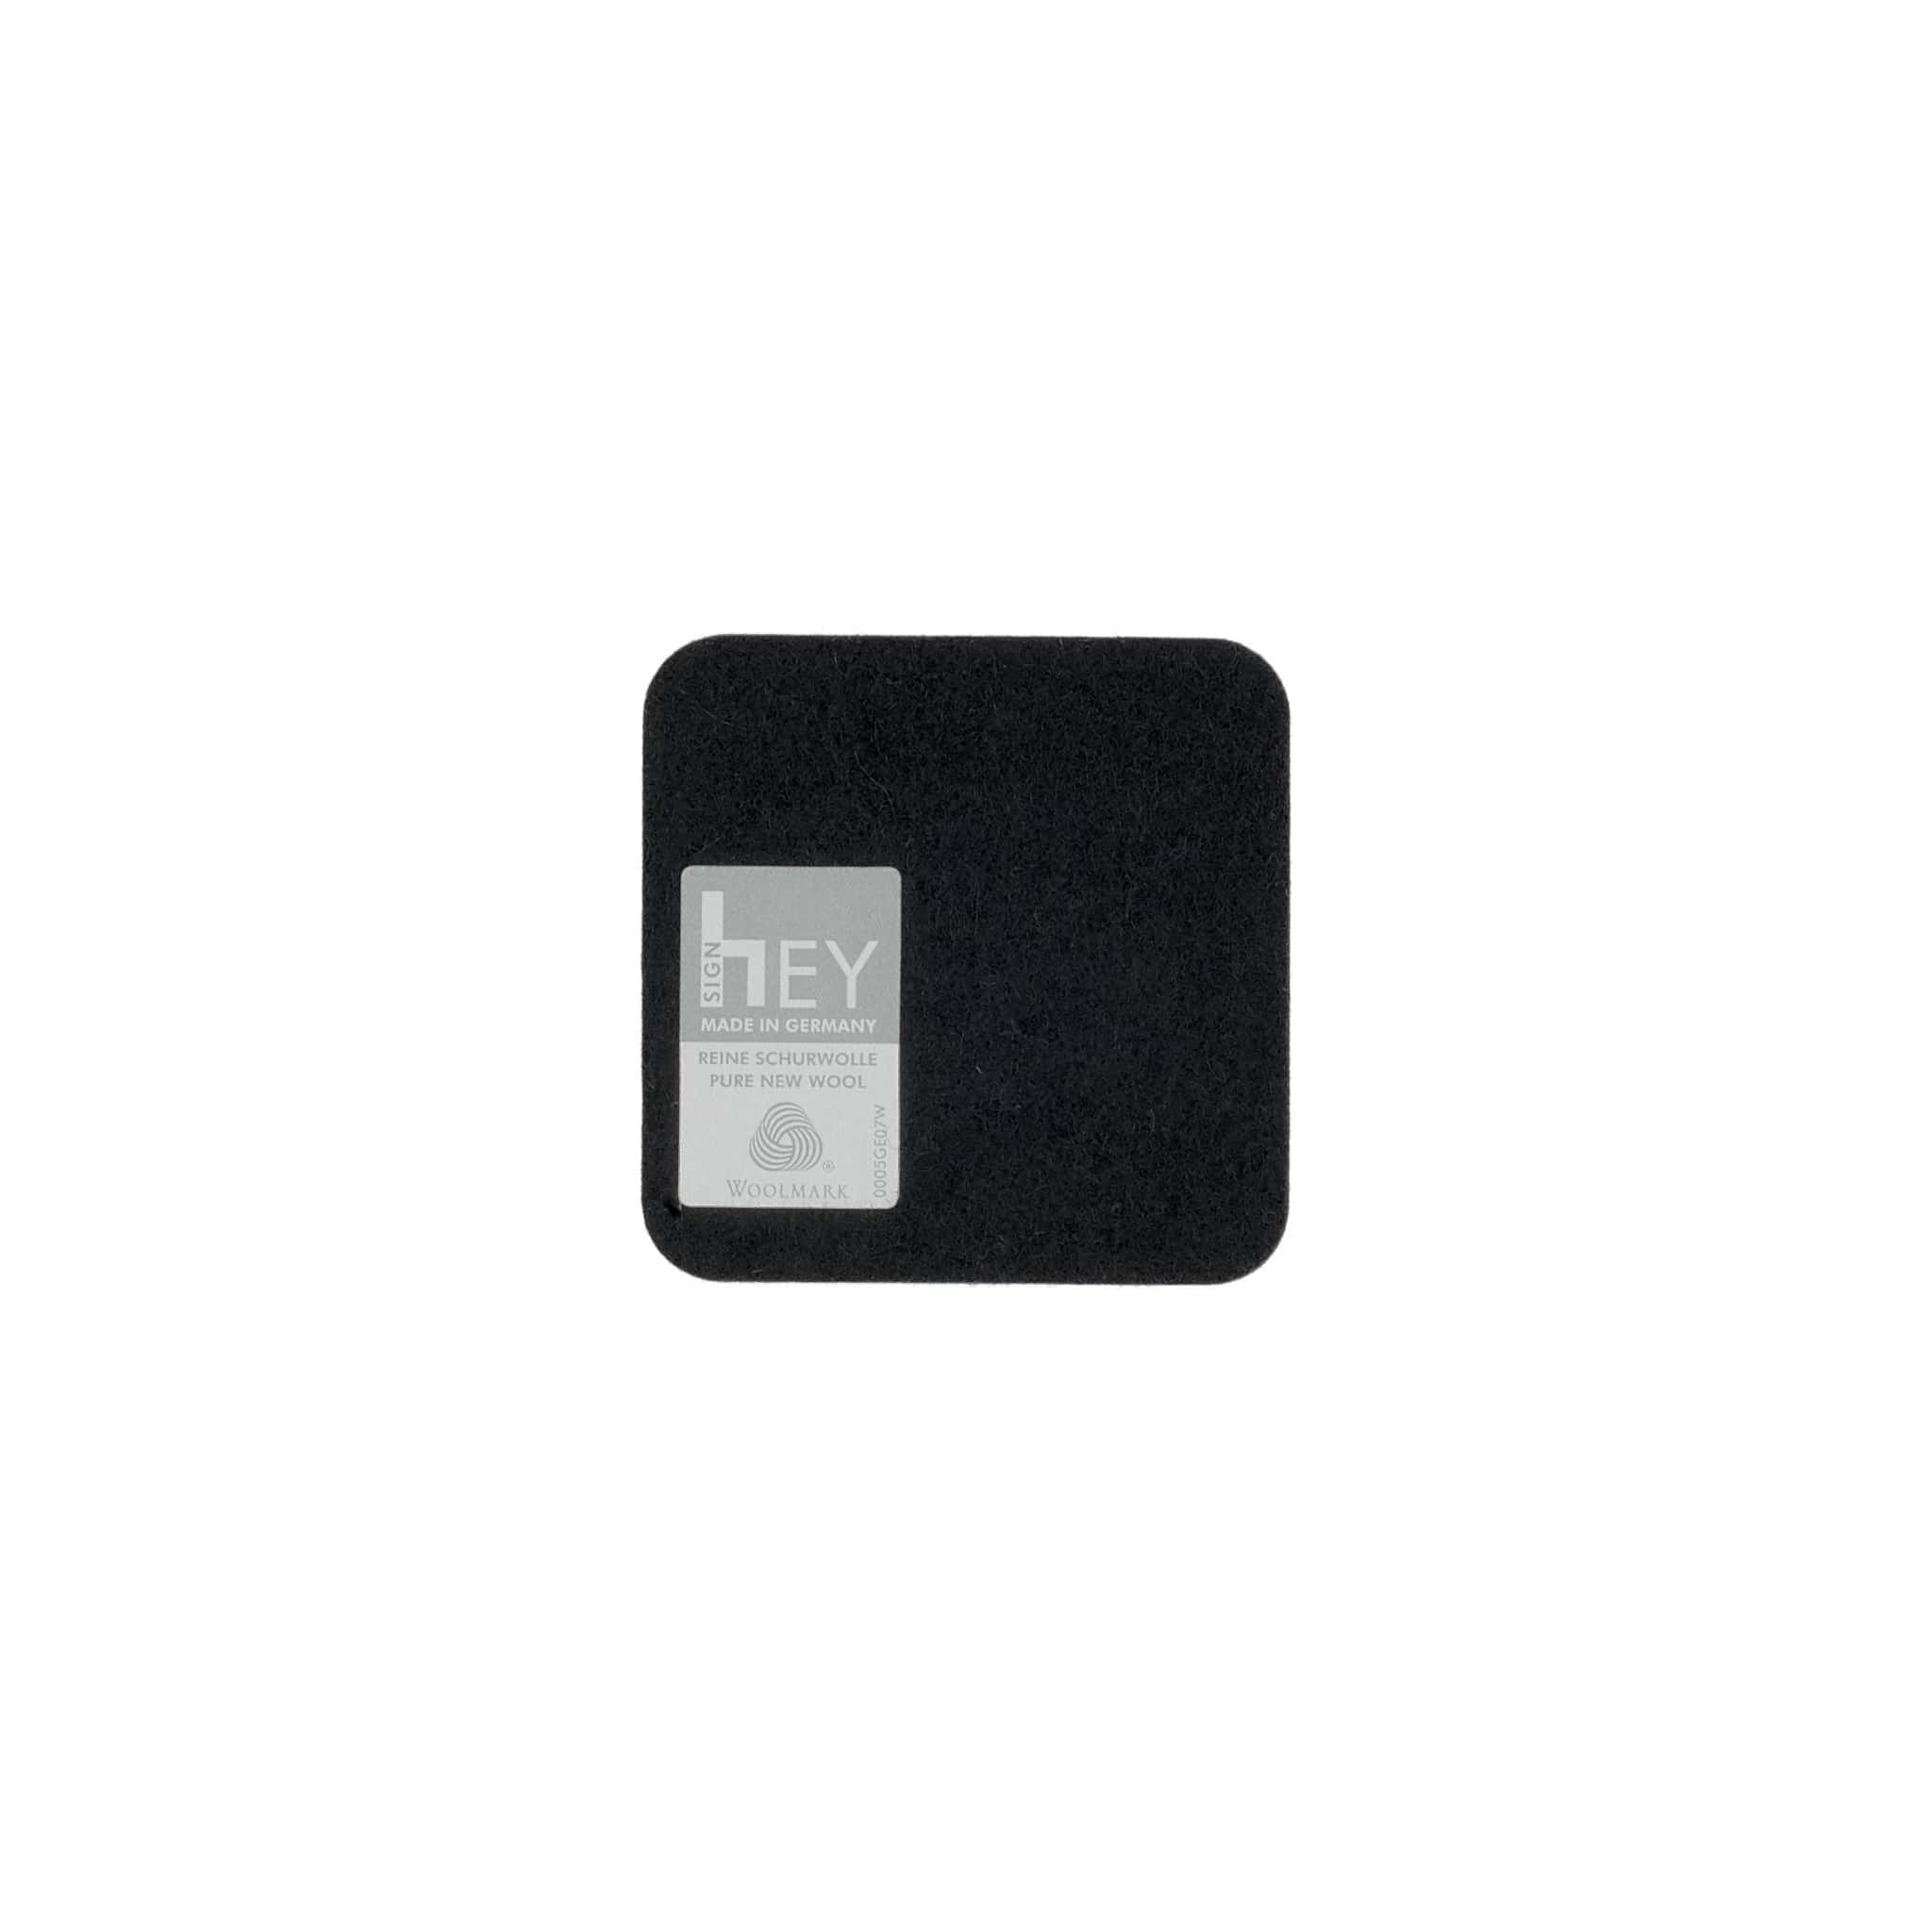 Square Felt Coaster in Black by Hey-Sign 300160902 looking at Back